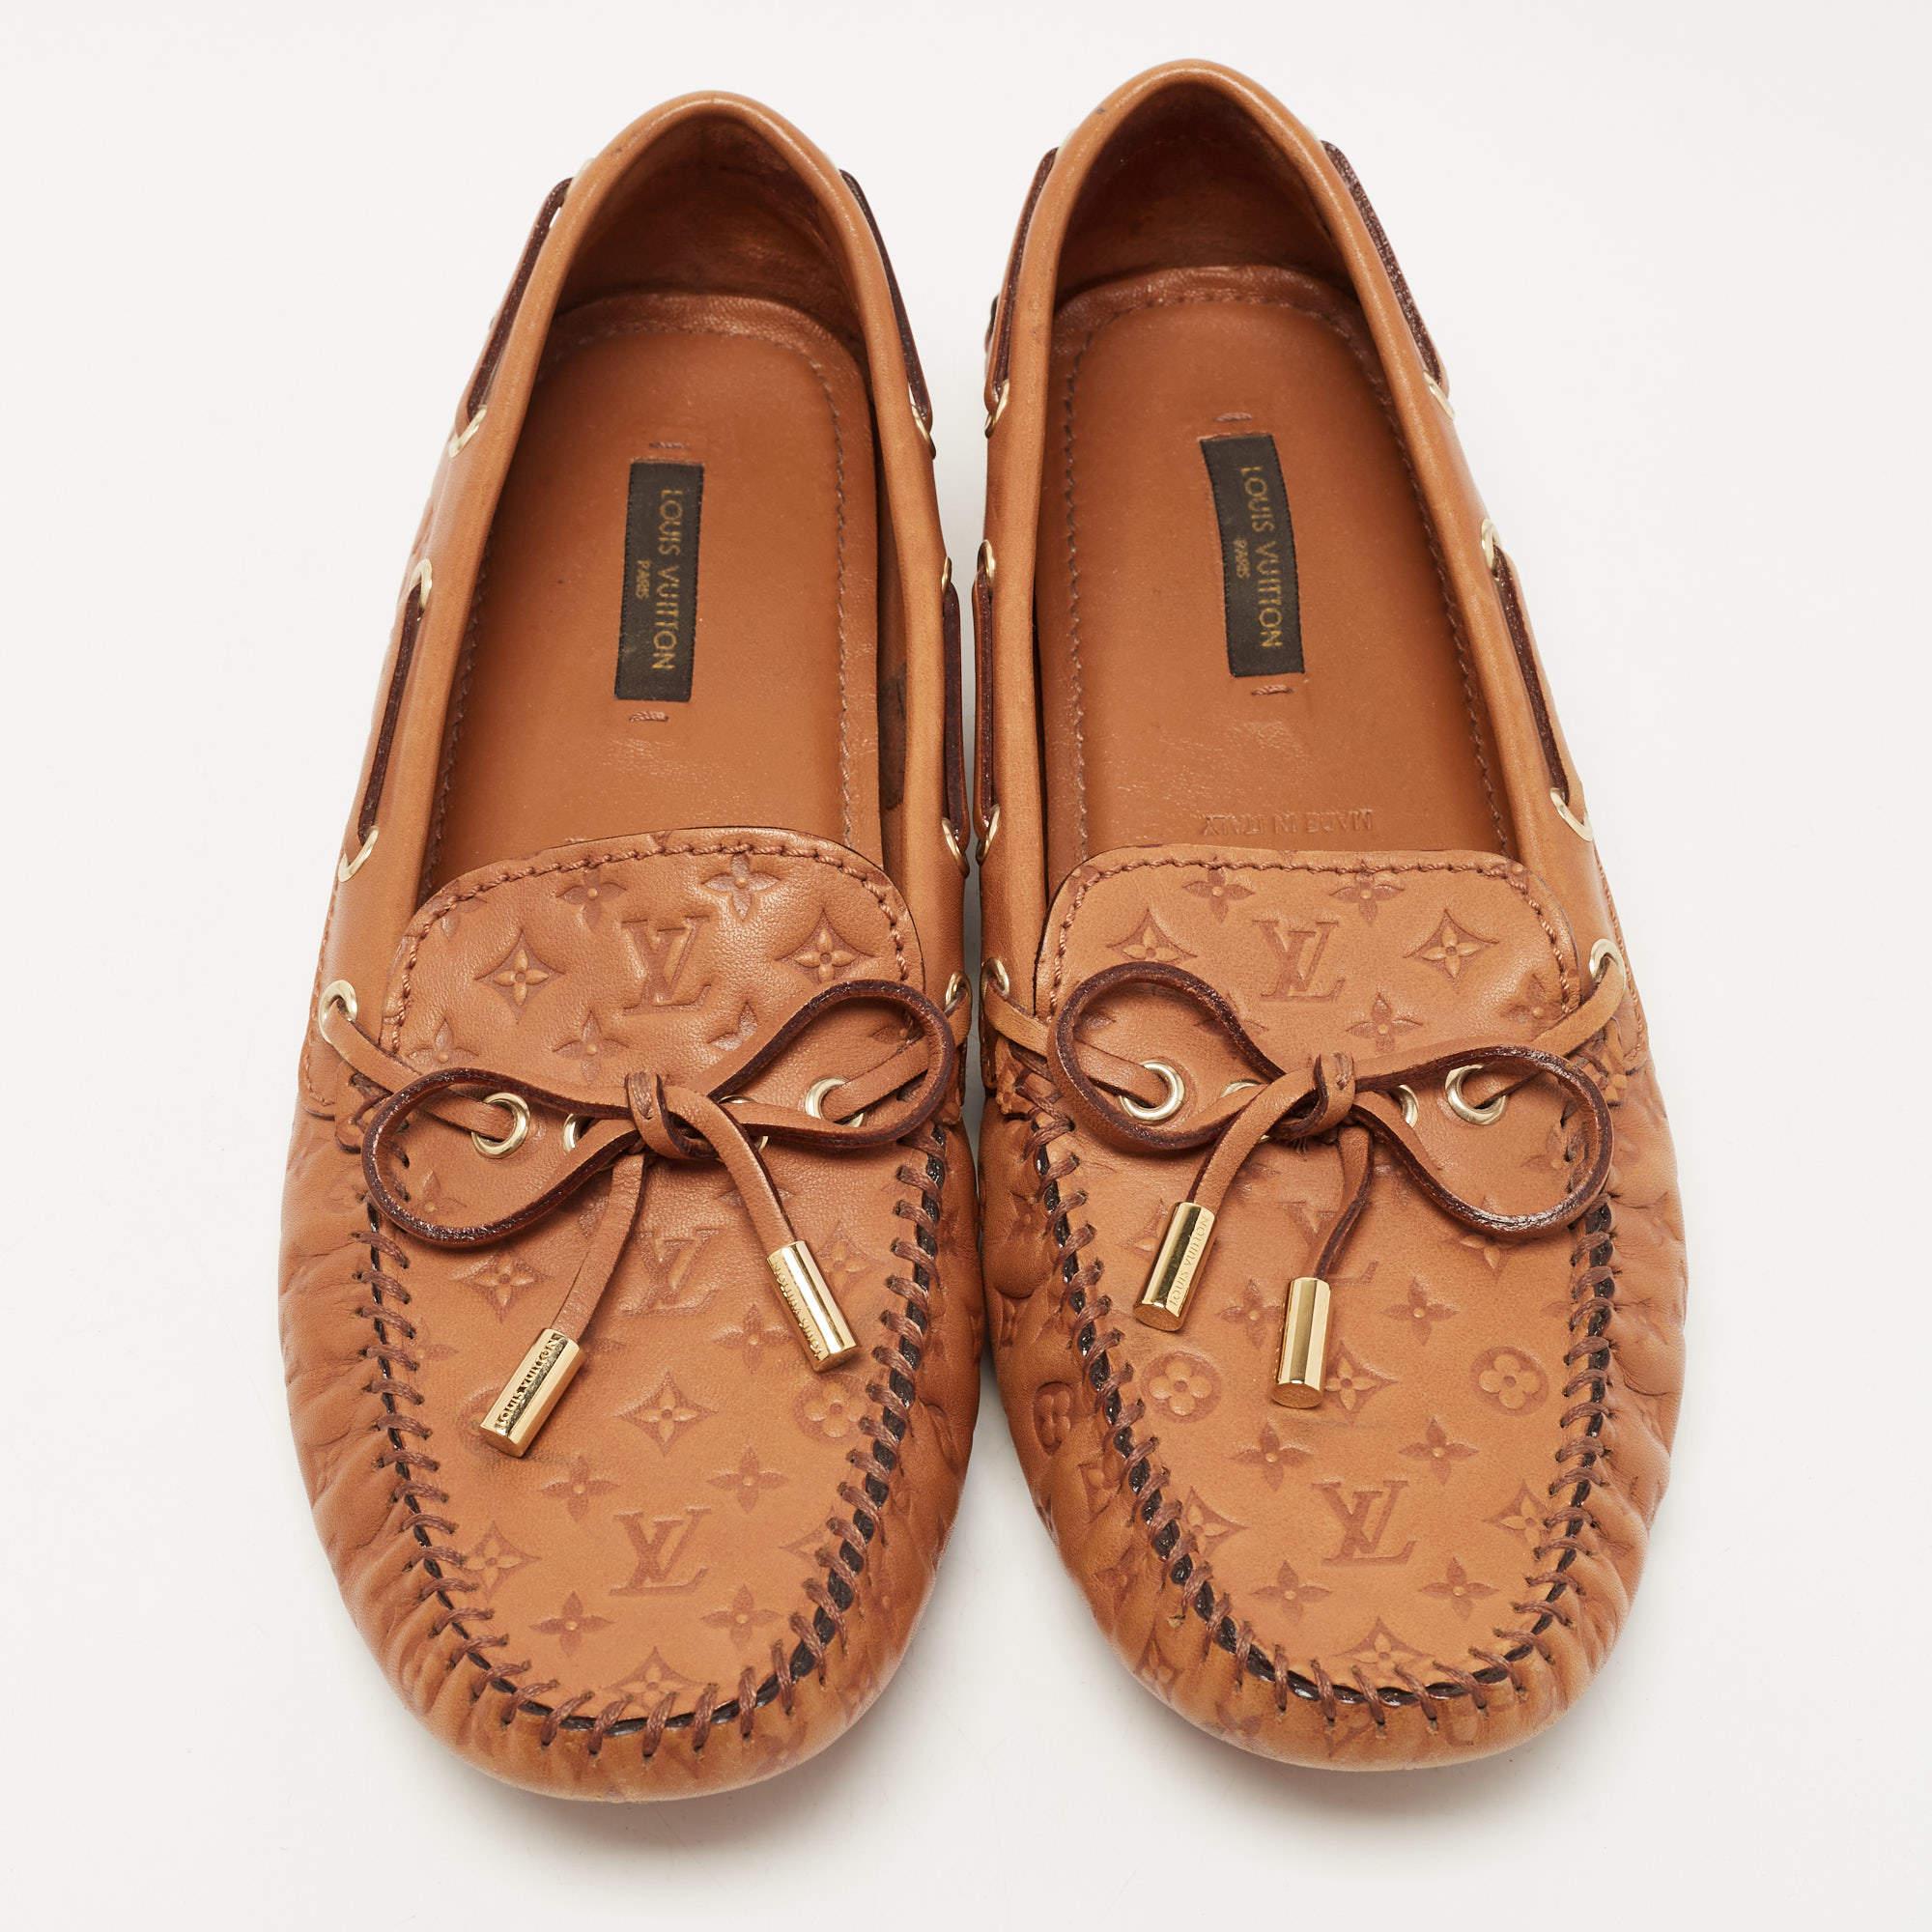 Practical, fashionable, and durable—these designer loafers are carefully built to be fine companions to your everyday style. They come made using the best materials to be a prized buy.

Includes
Original Dustbag